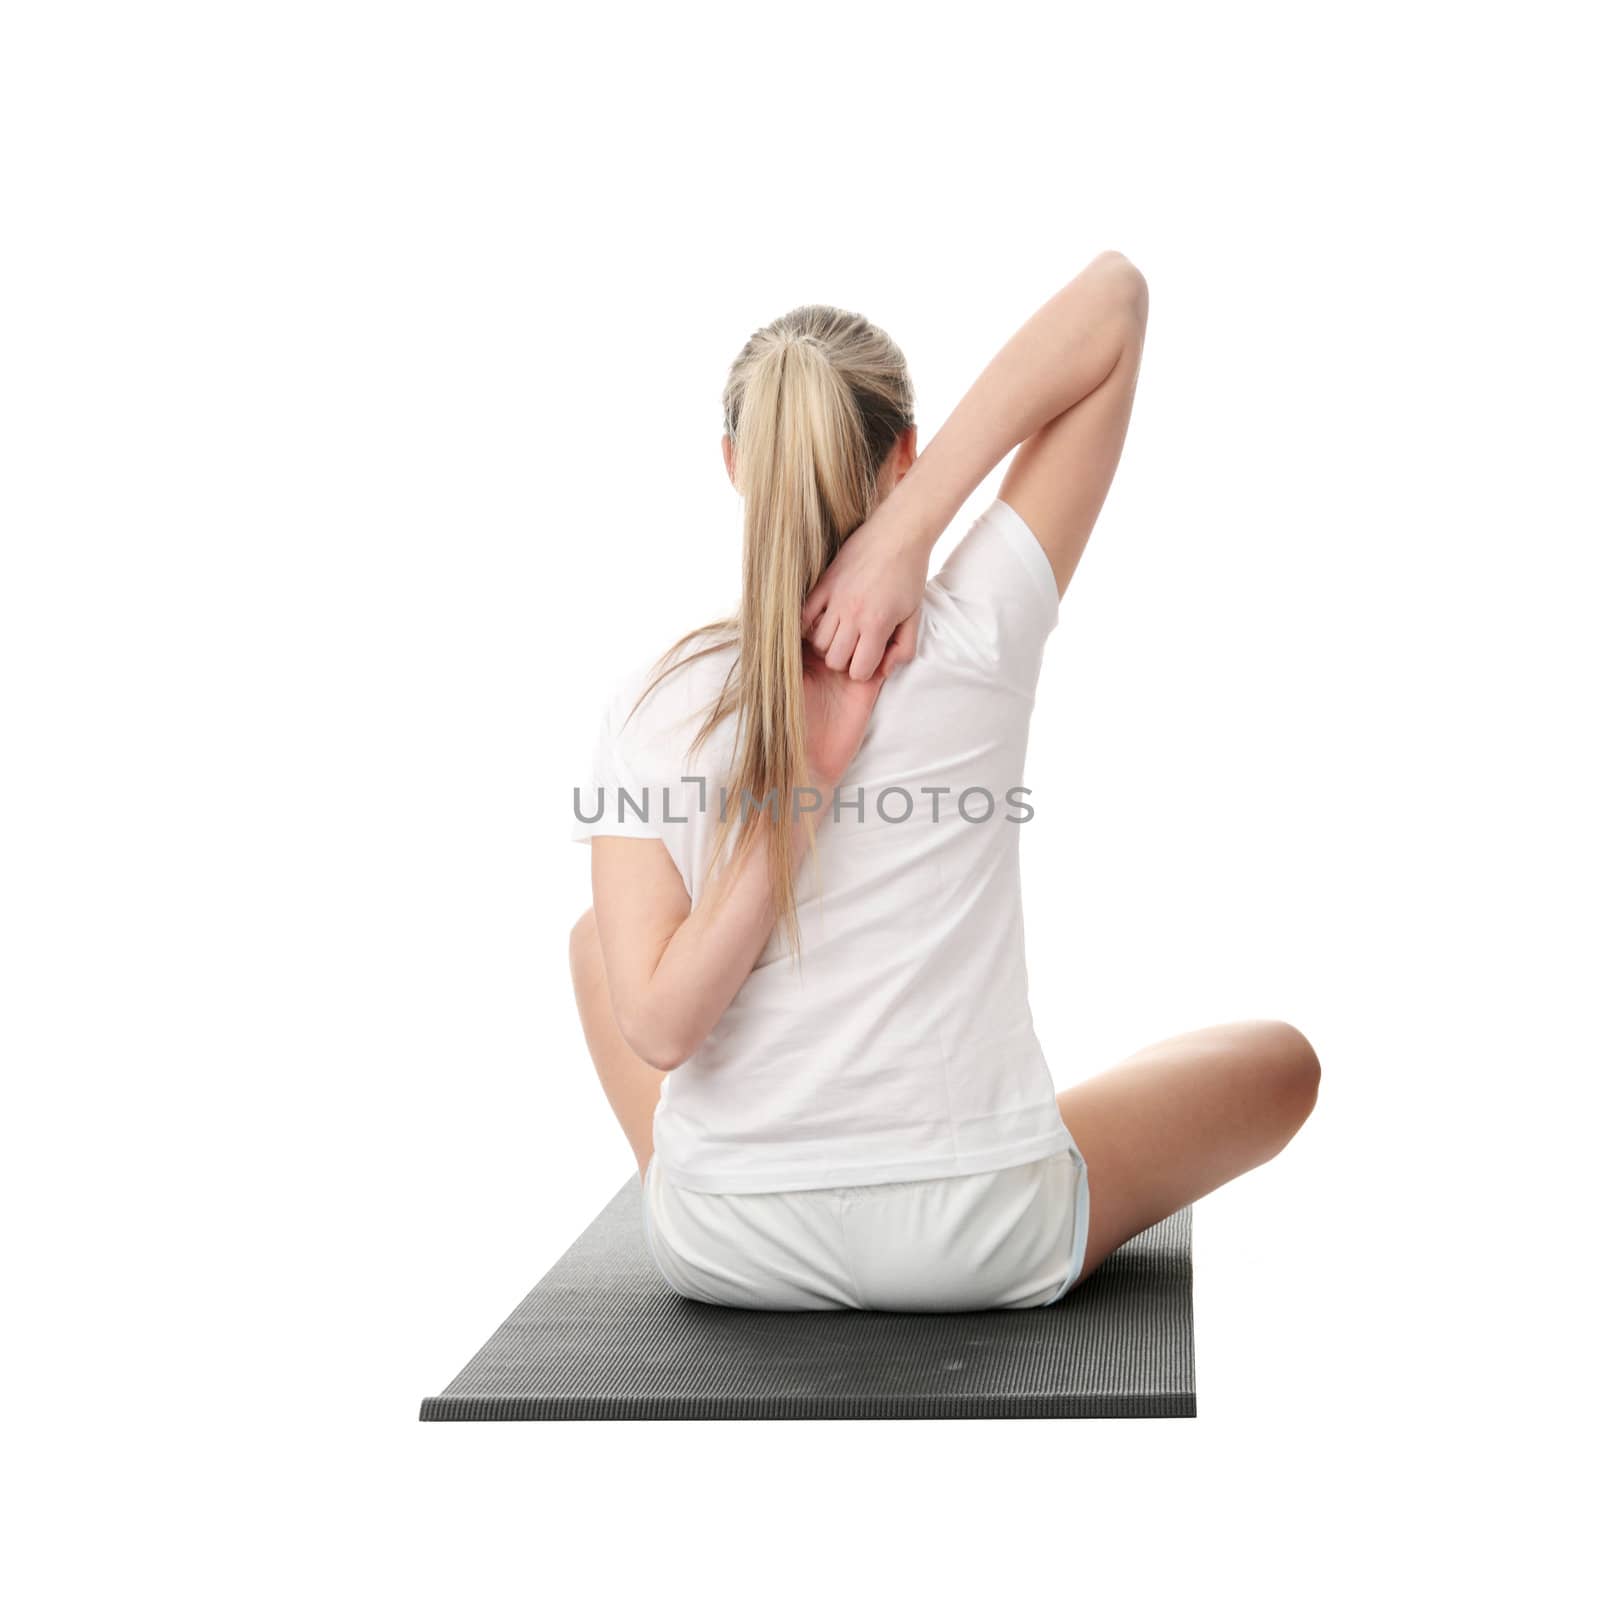 Young woman exercising isolated on white background